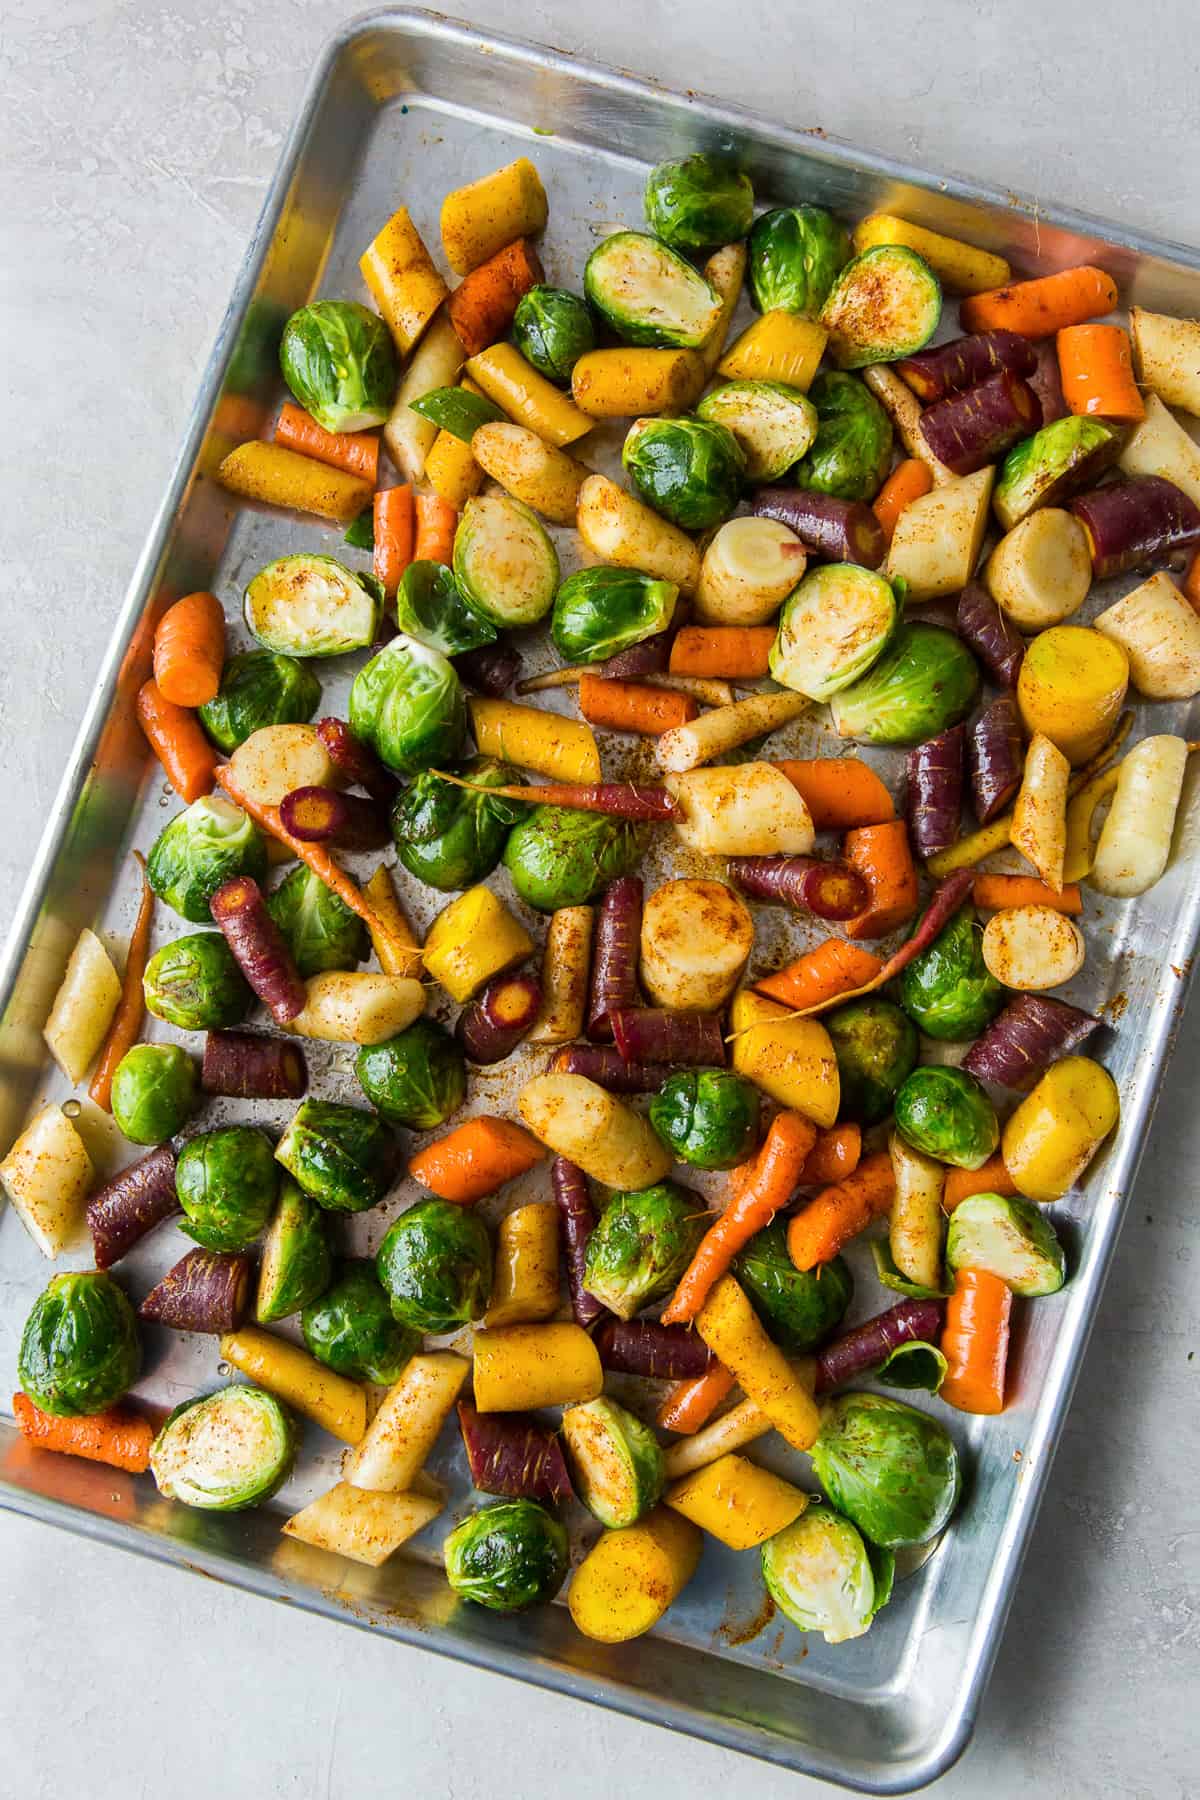 Rainbow carrots and Brussels sprouts with seasoning on a baking sheet.